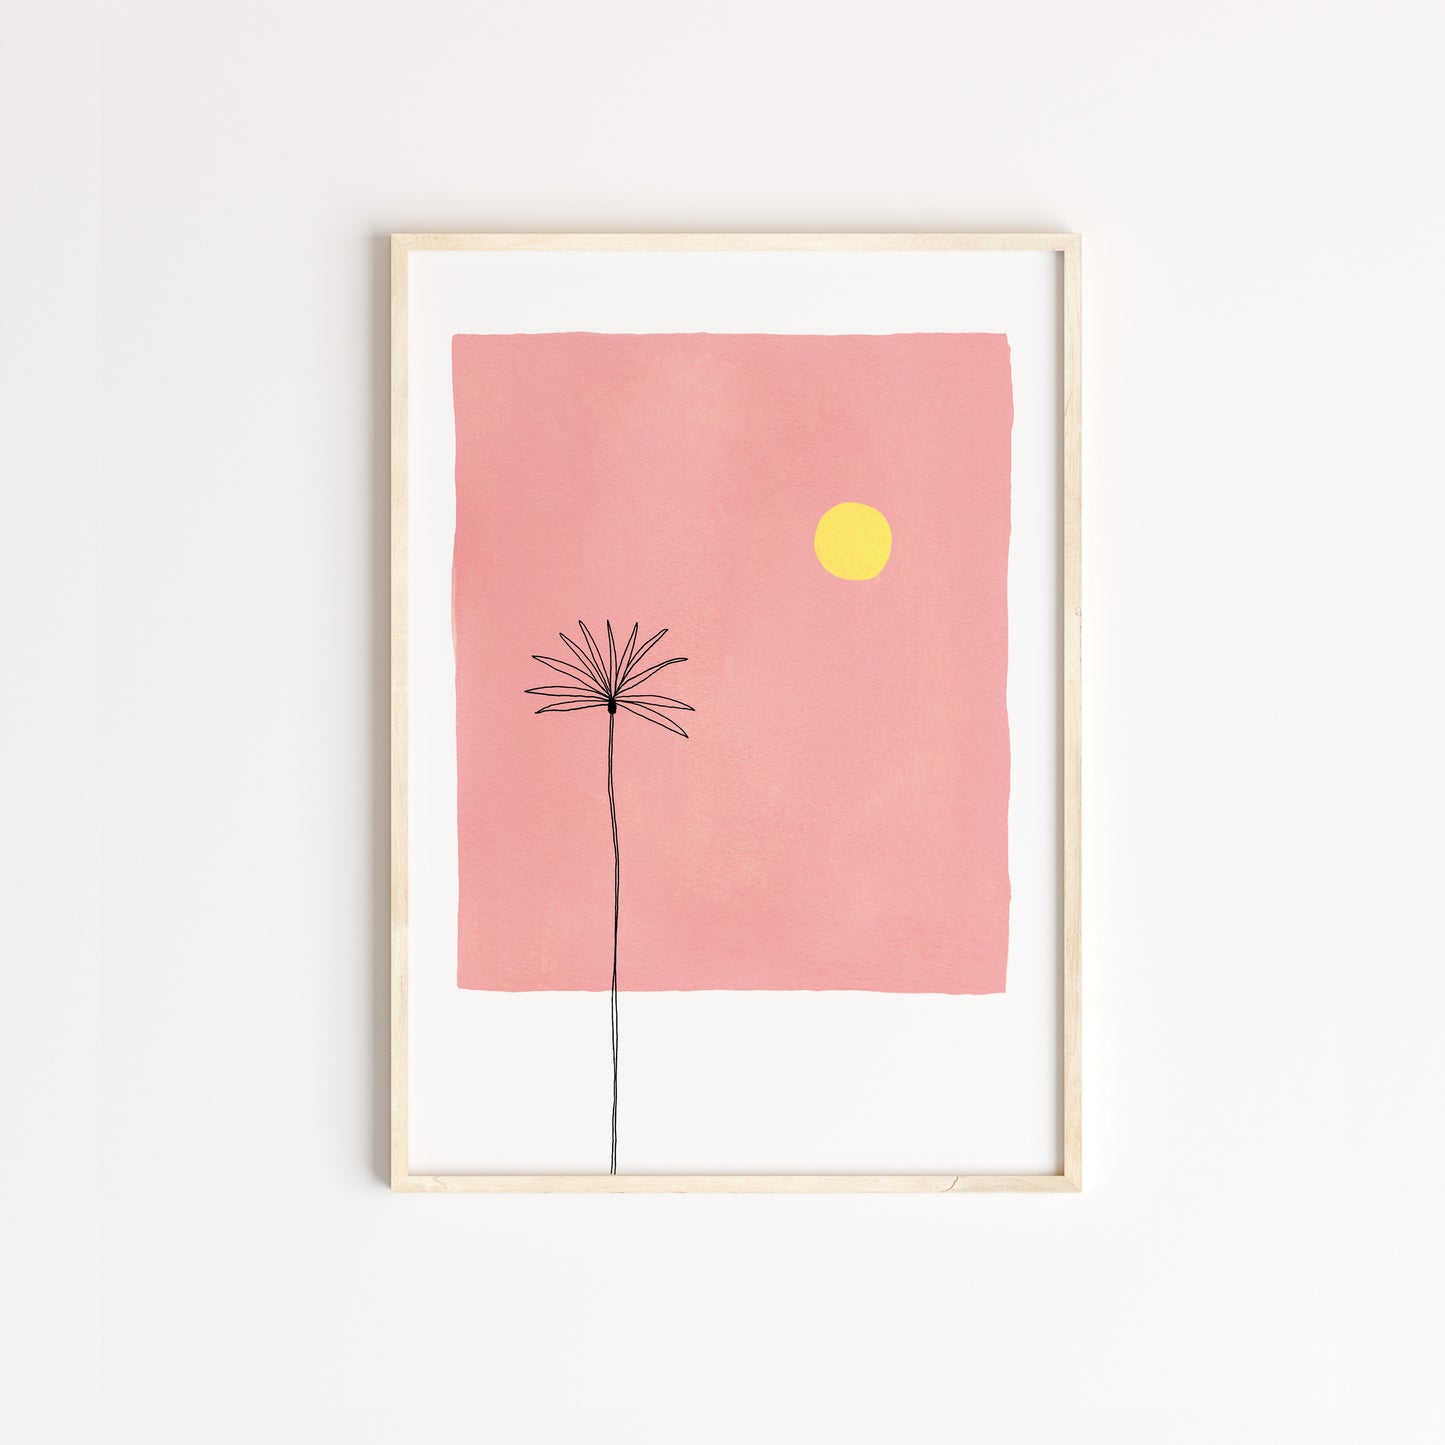 Pink Sunset with a yellow sun painted with gouache, with a black line drawing of a palm tree. Displayed in Oak Frame